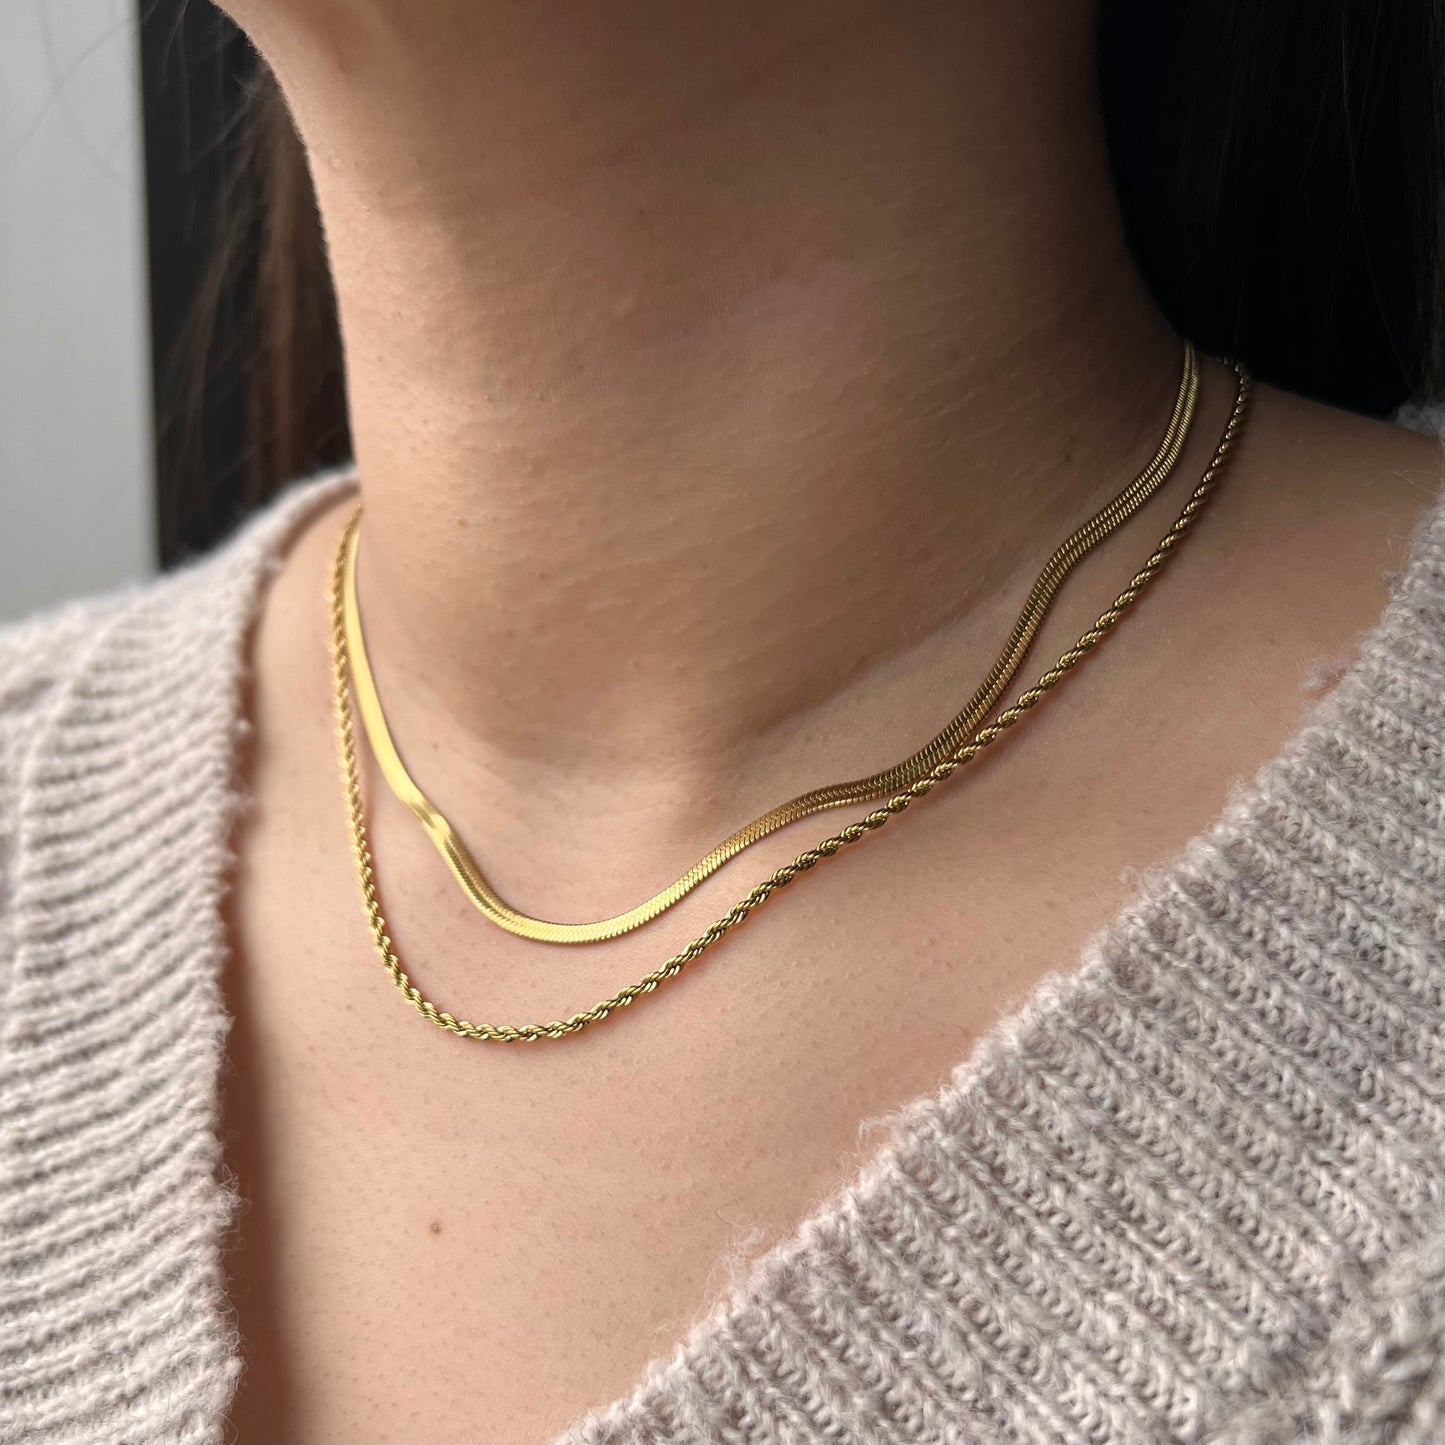 Get trendy with Twist Necklace -  available at Alma Ireland. Grab yours for €25.99 today!